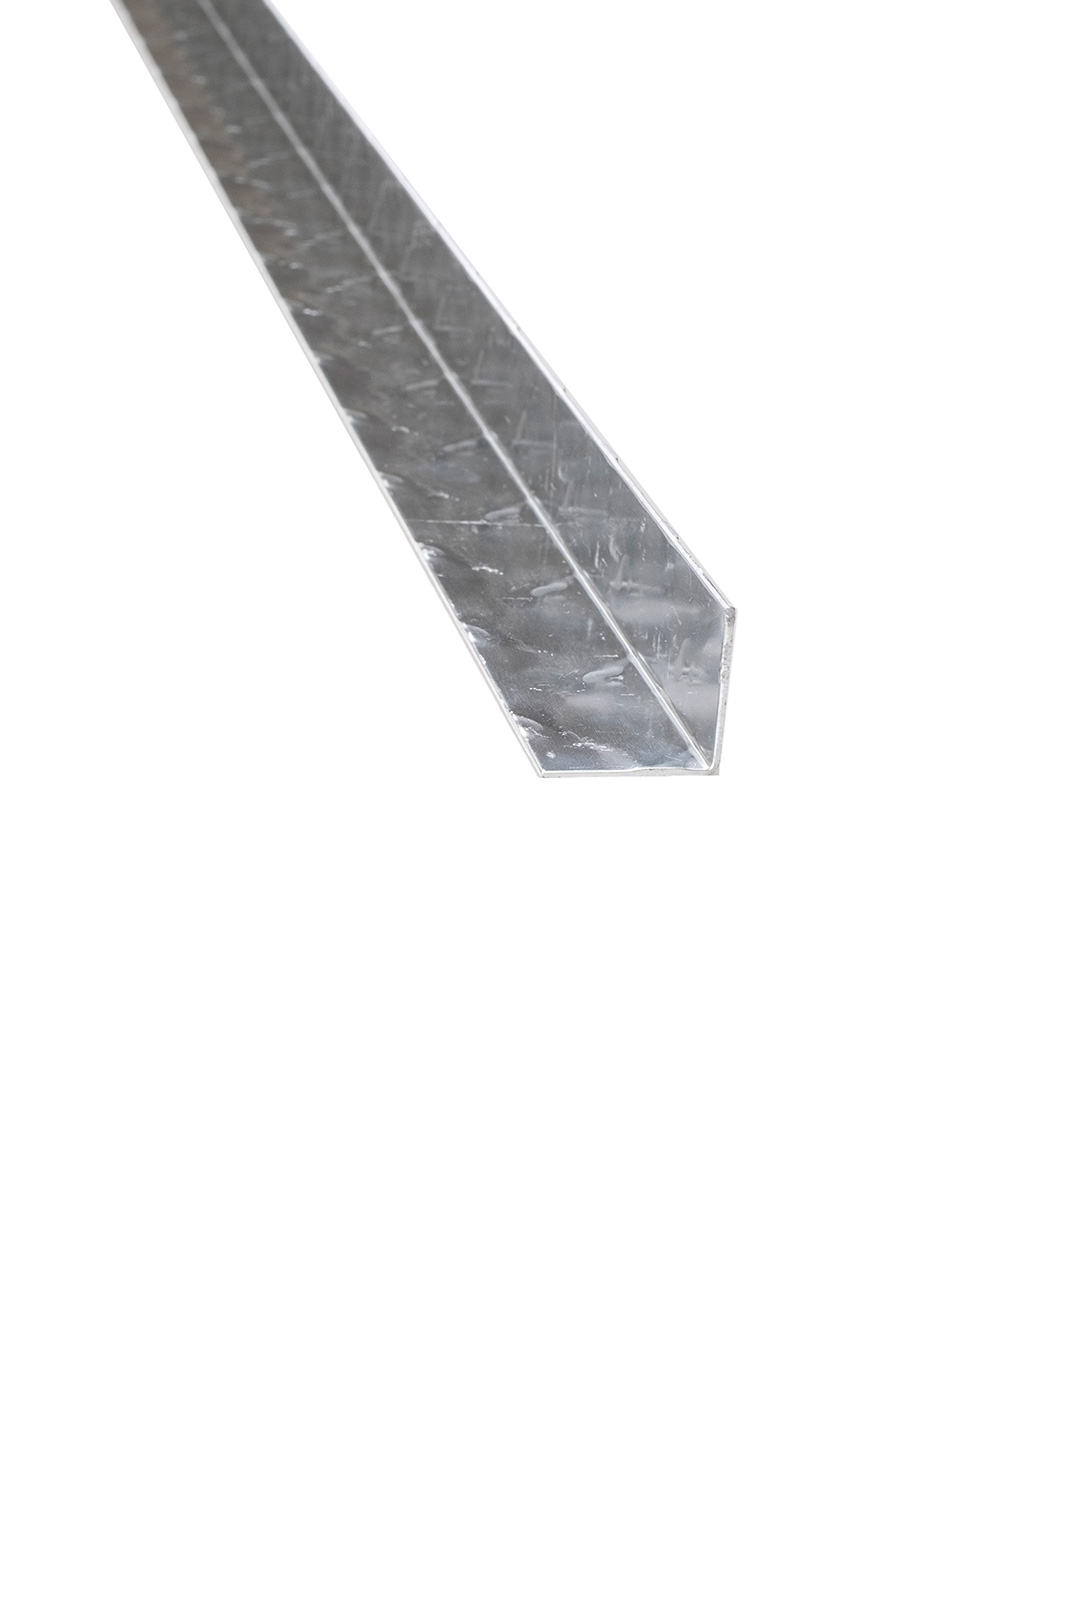 Buy Aluminium & Steel (Tube,Plate,Bar) products Online